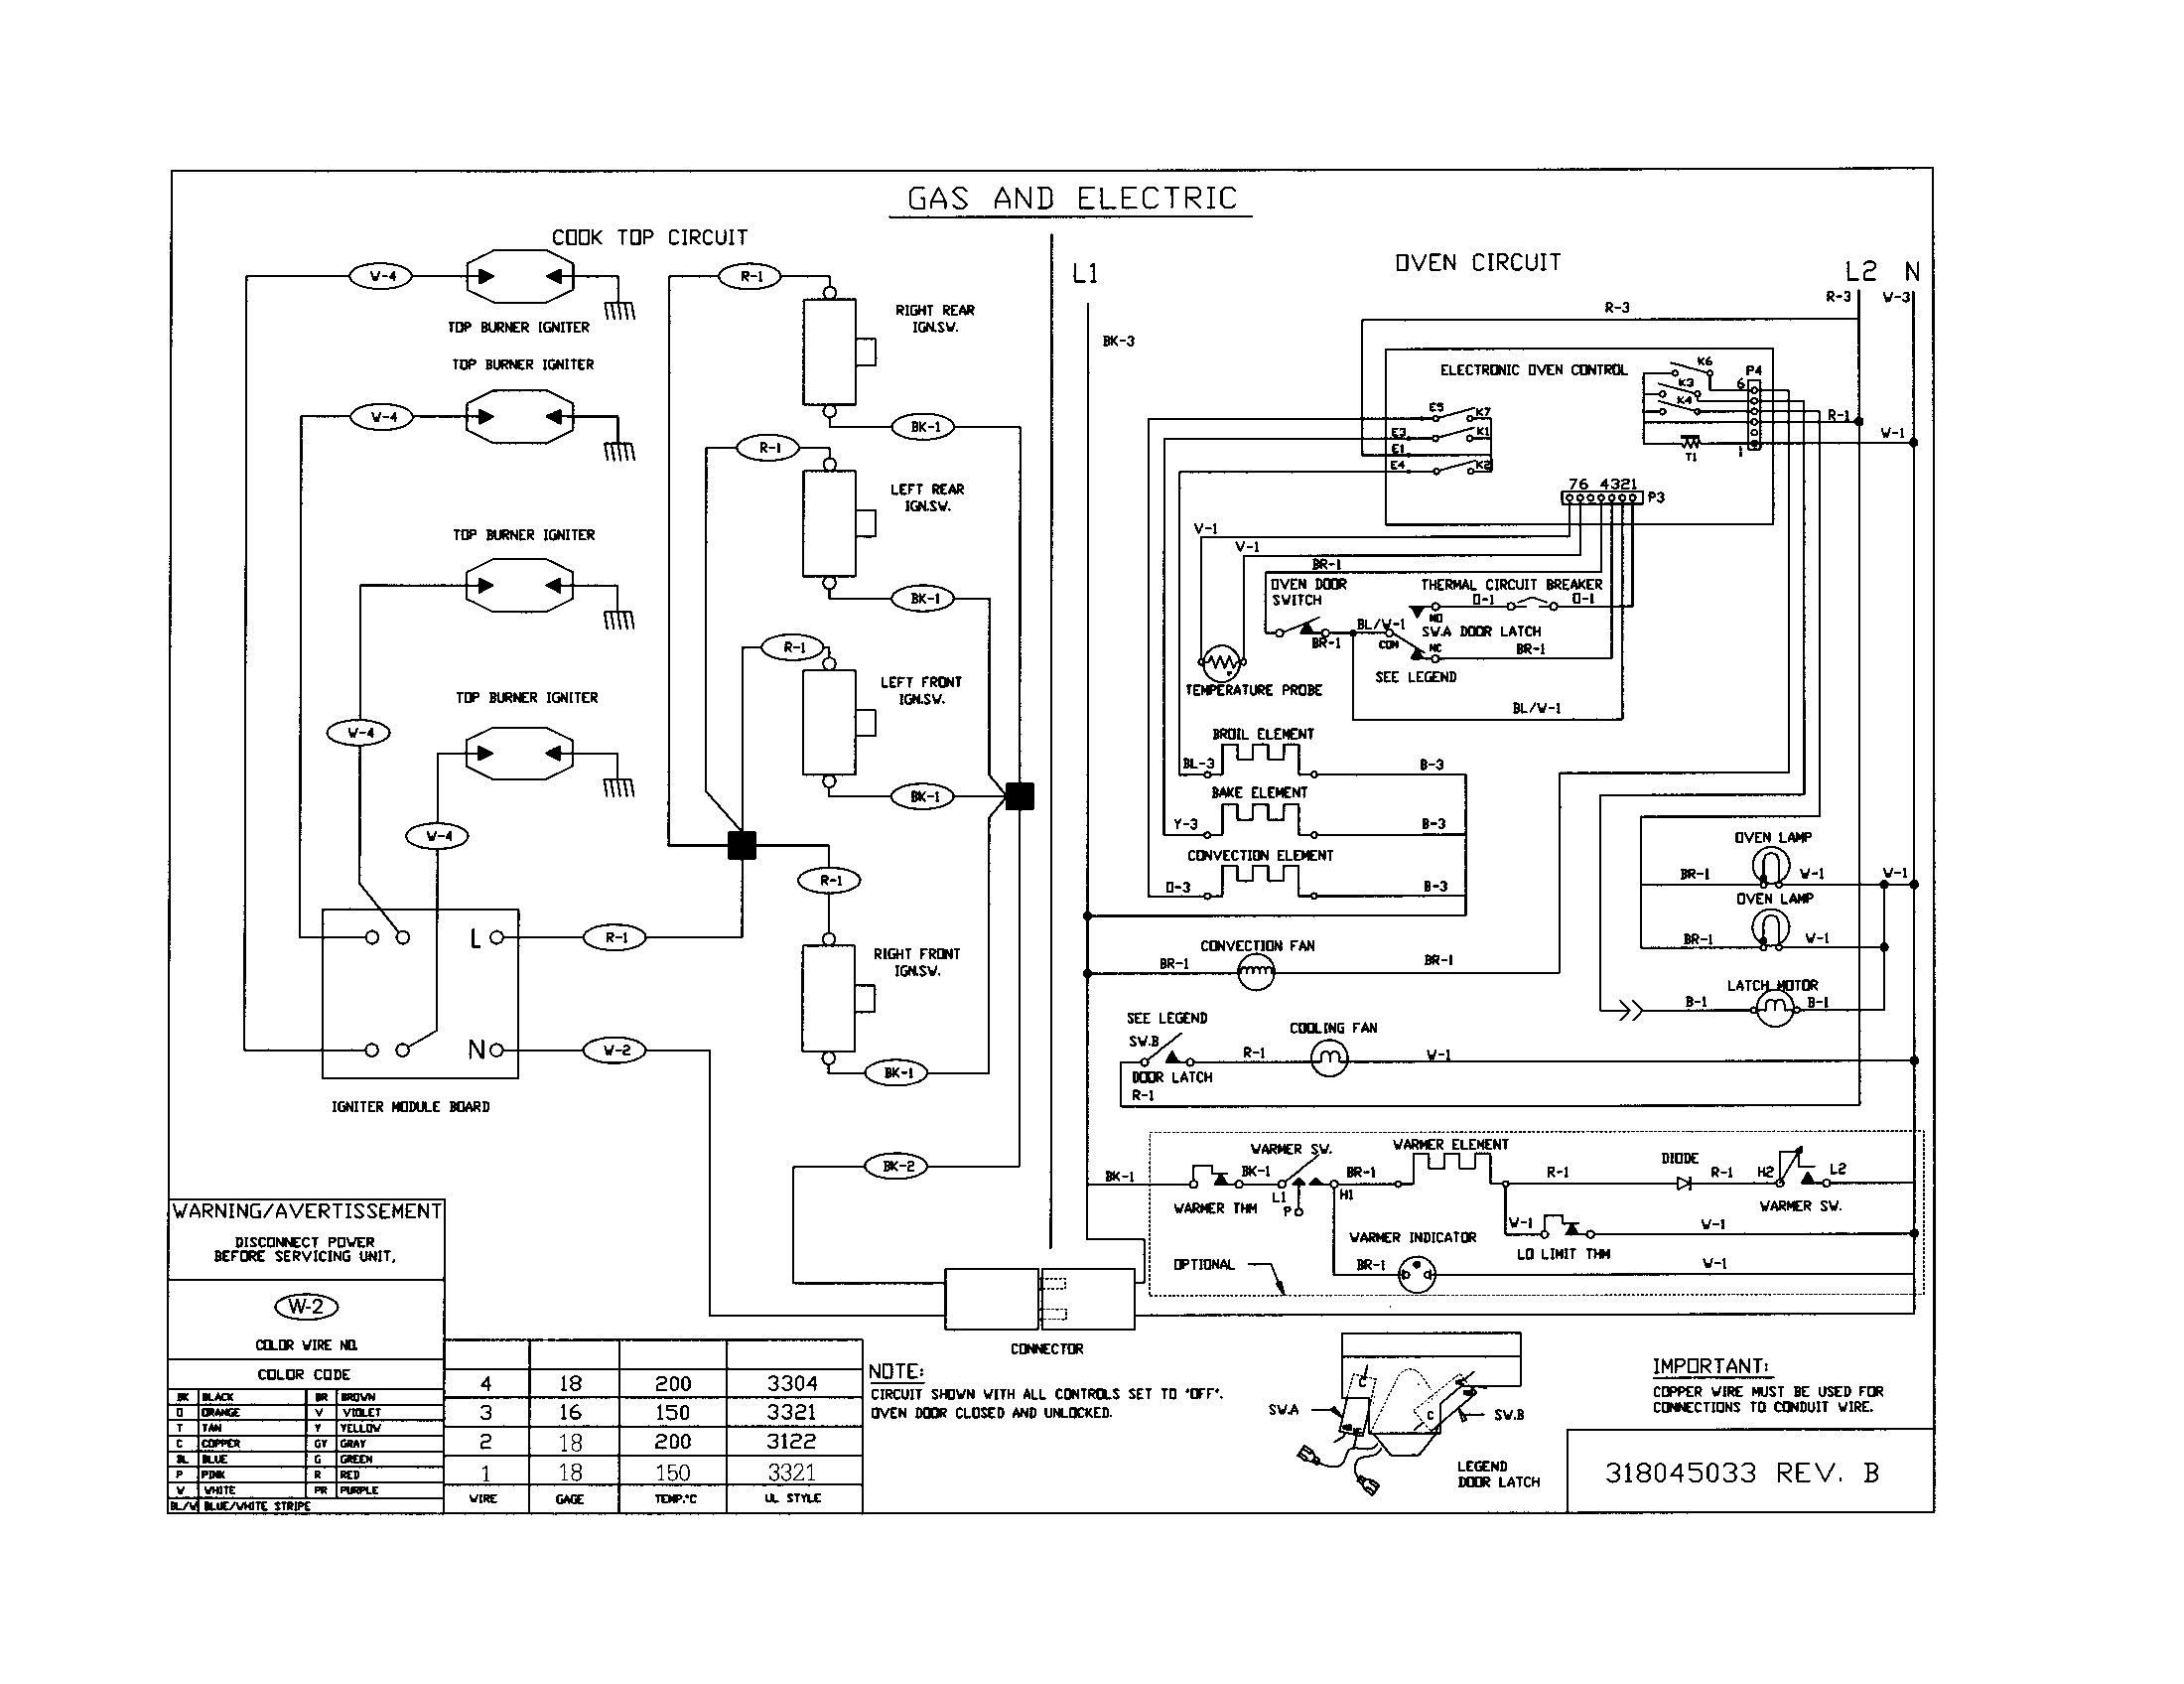 Dometic Refrigerator Parts Diagram Page 27 Dometic Refrigerator Rm 7605 L User Guide with Wiring Of Dometic Refrigerator Parts Diagram